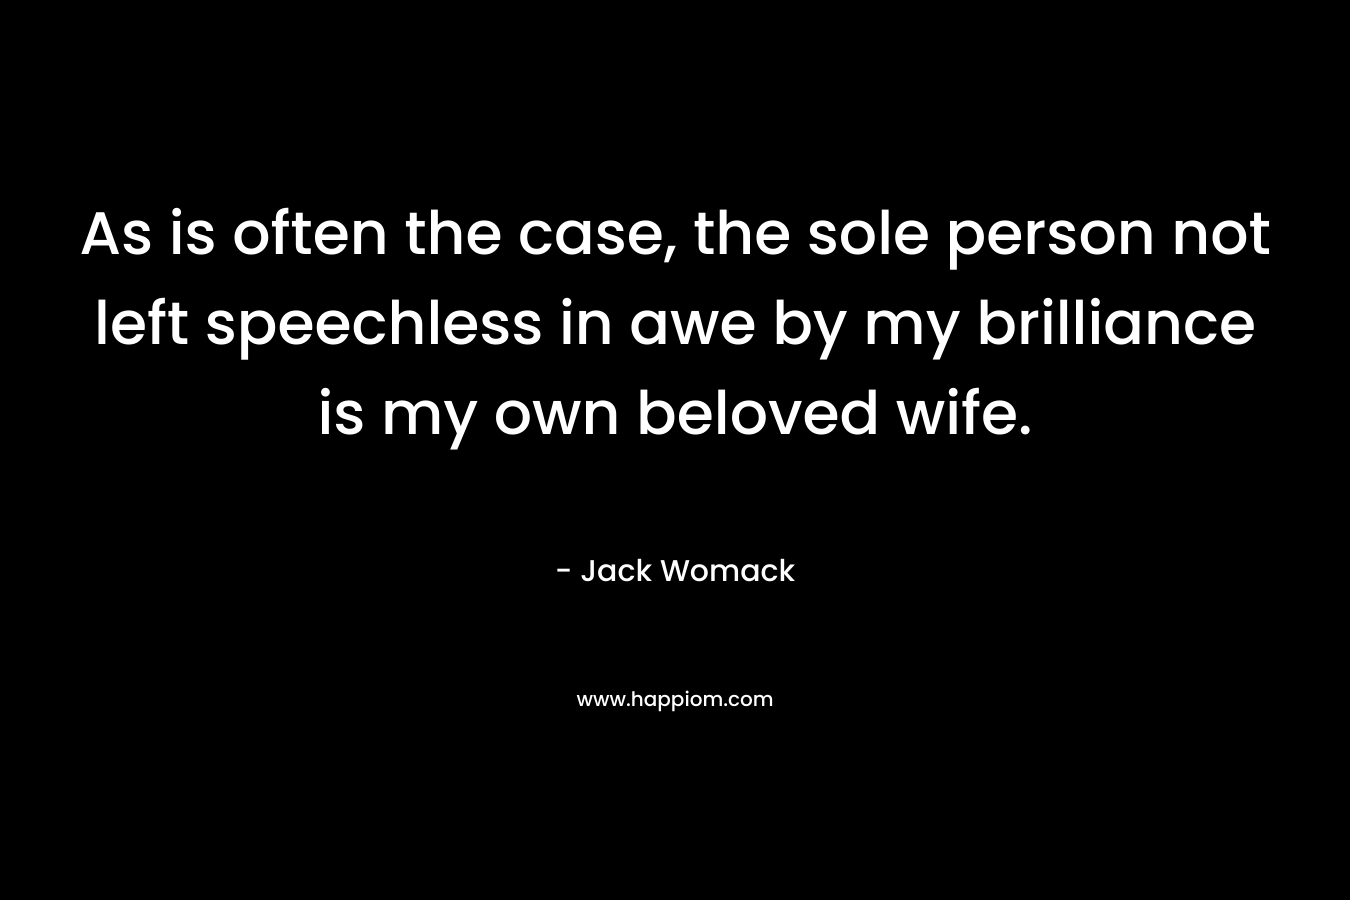 As is often the case, the sole person not left speechless in awe by my brilliance is my own beloved wife. – Jack Womack